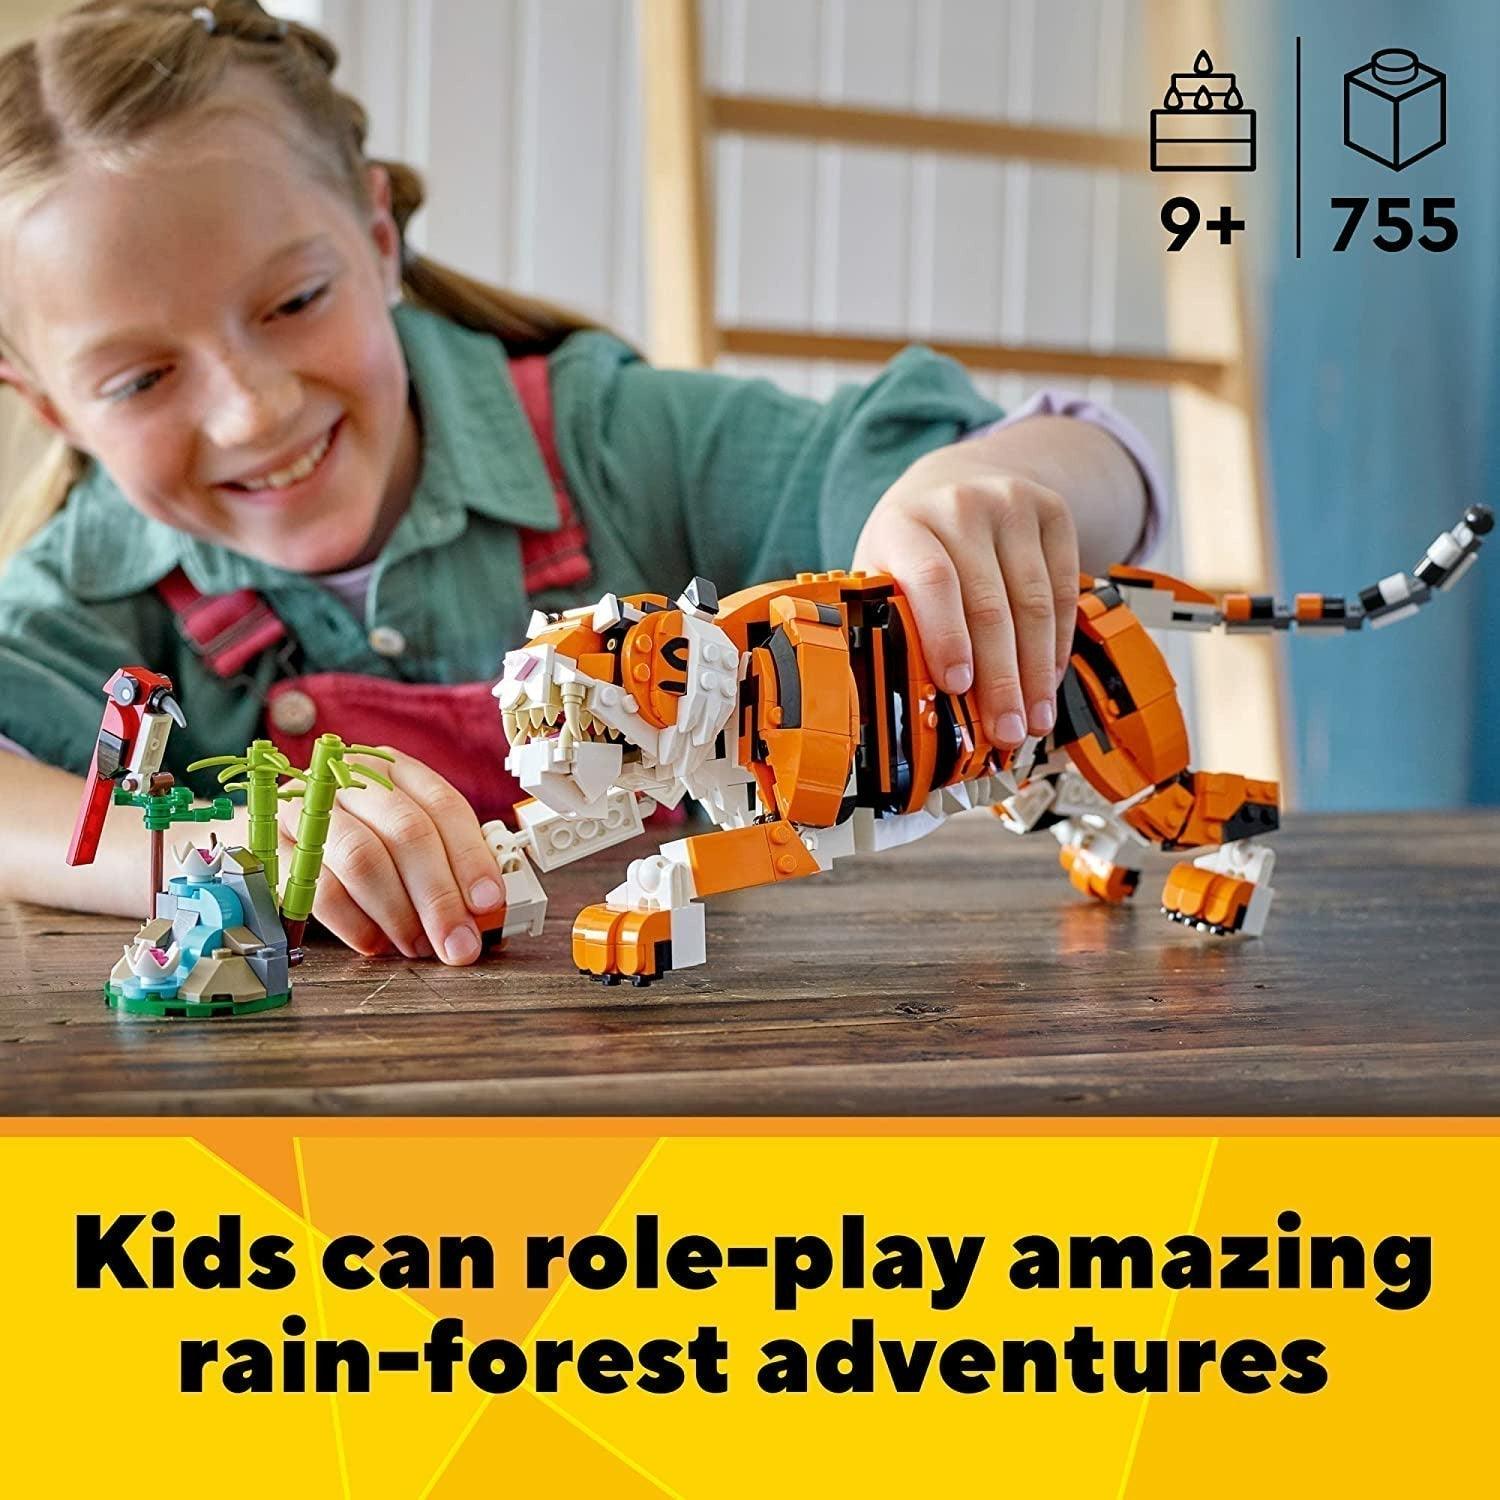 LEGO Creator 3in1 Majestic Tiger 31129 Building Kit; Animal Toys for Kids, Featuring a Tiger, Panda and Koi Fish; Creative Gifts for Kids Aged 9+ Who Love Imaginative Play (755 Pieces) - BumbleToys - 8+ Years, 8-13 Years, Animals, Boys, Creator, Creator 3In1, LEGO, OXE, Pre-Order